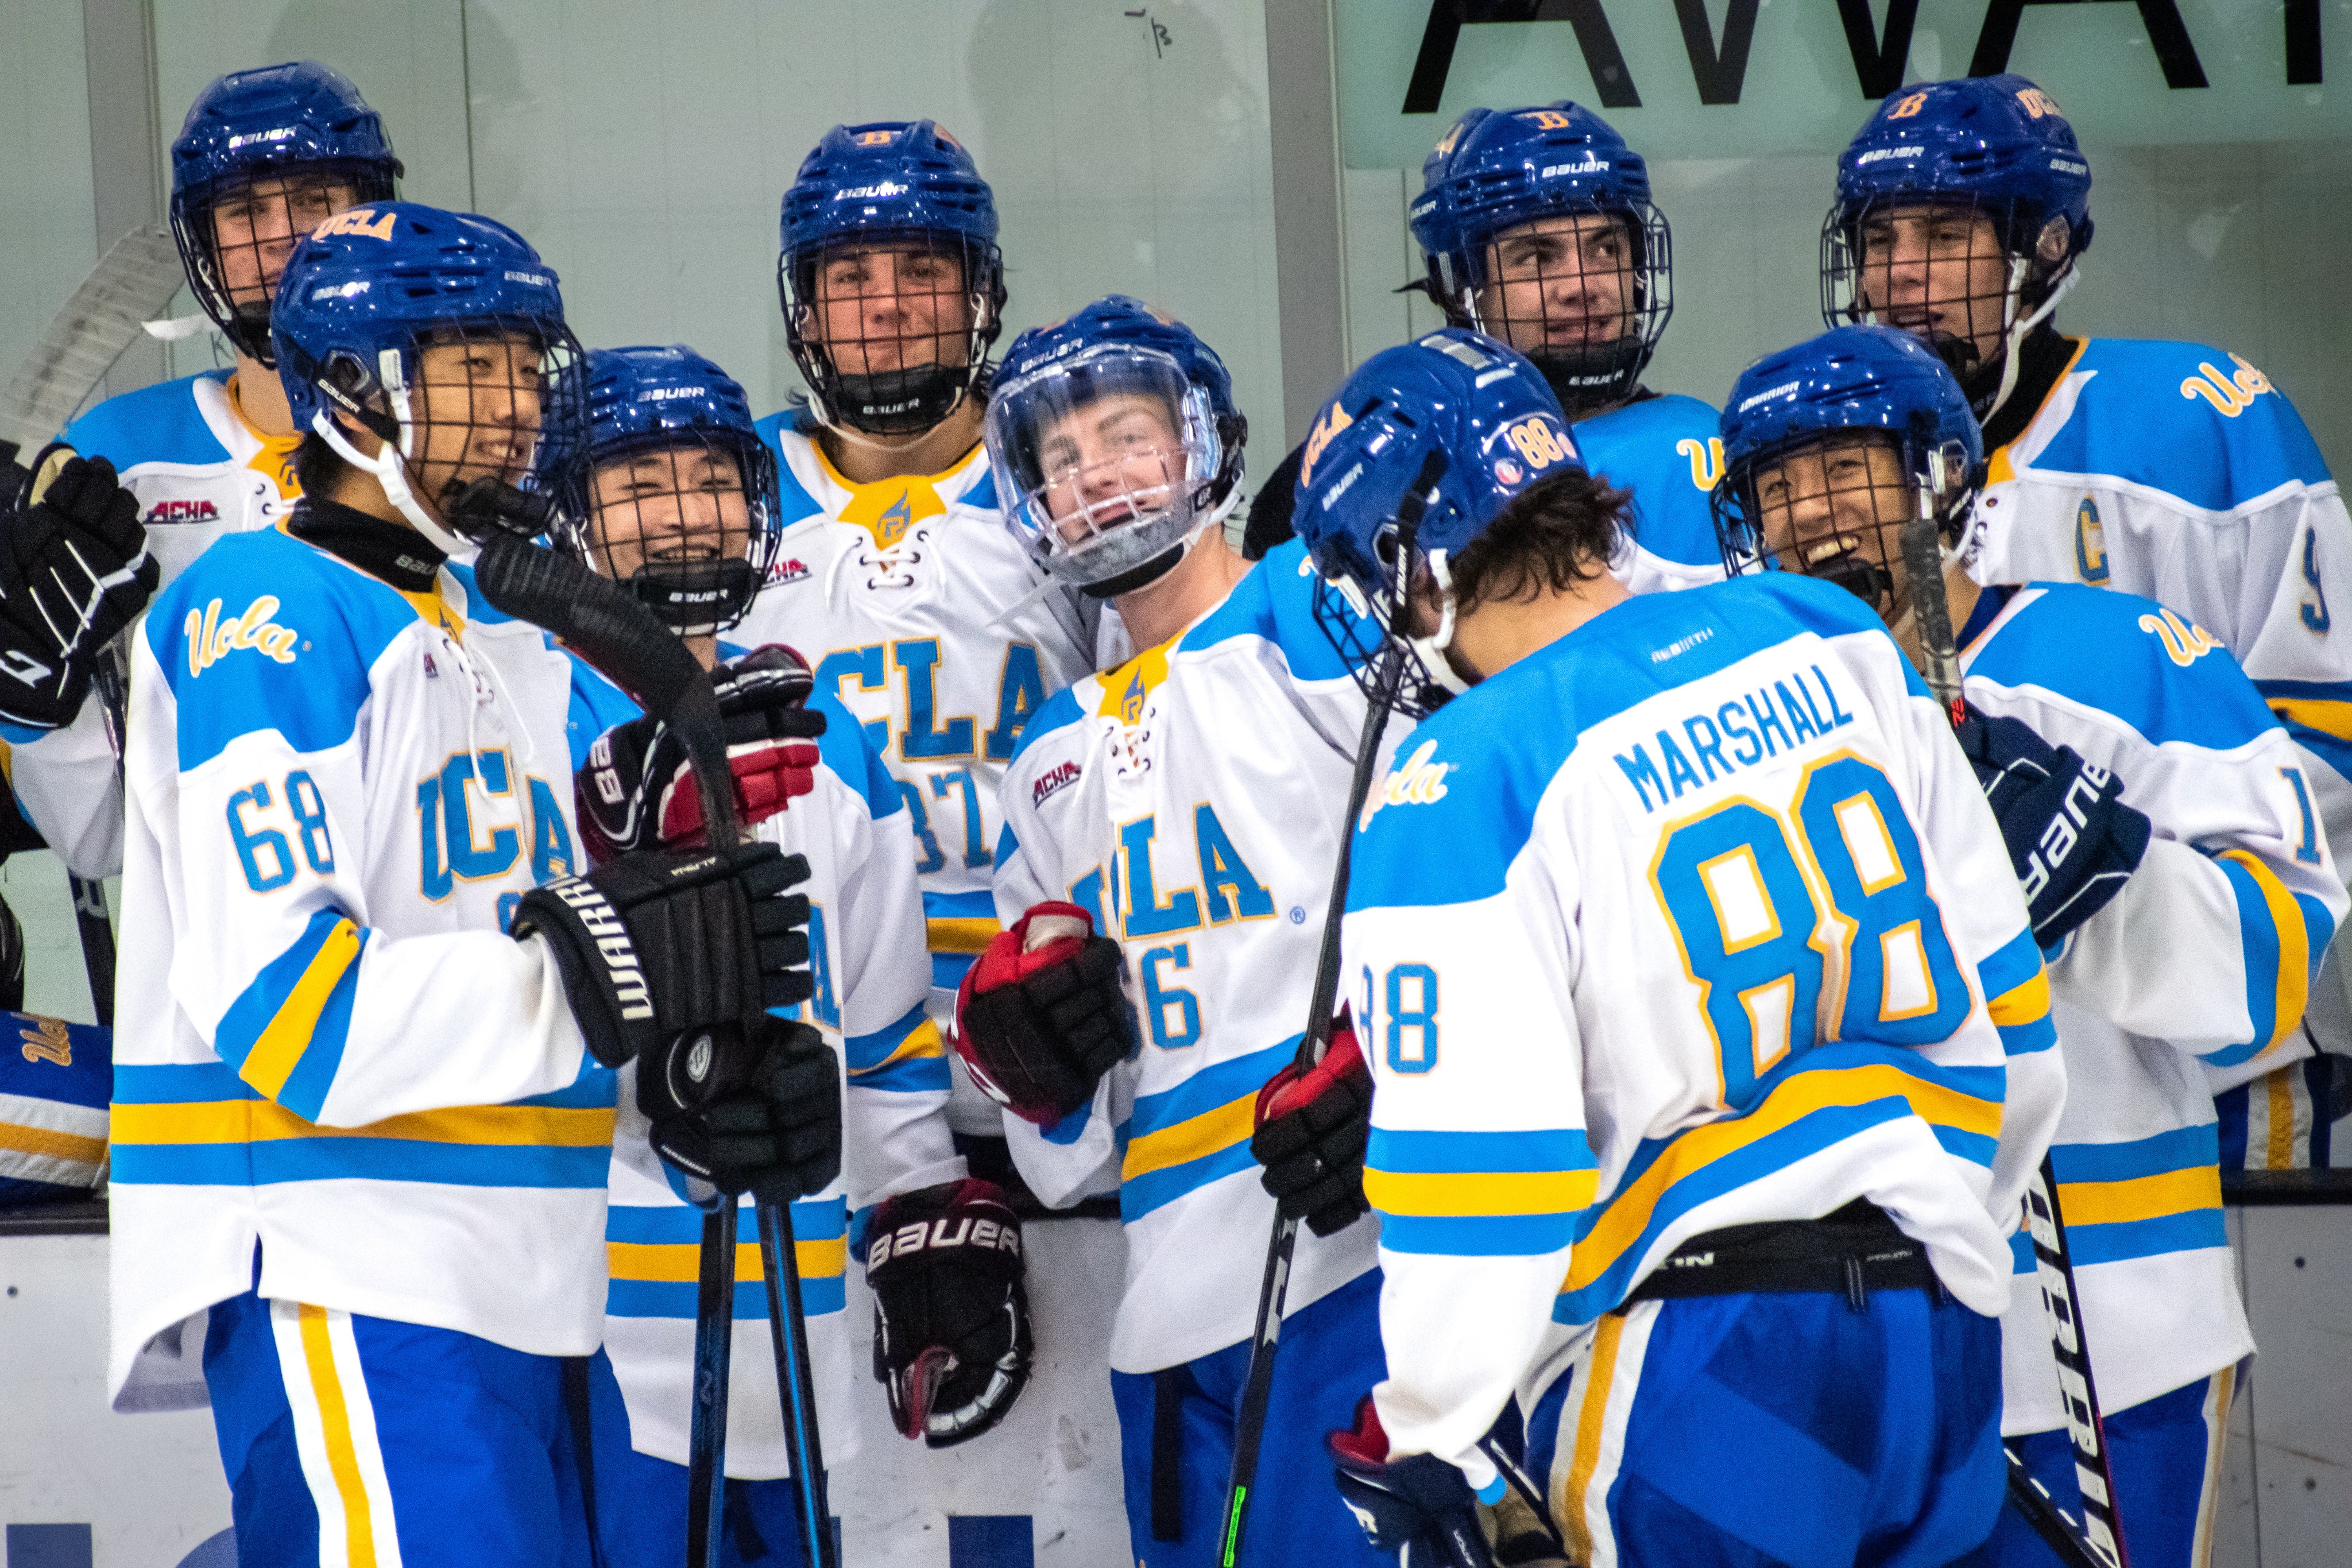 UCLA Ice Hockey on X: See these beautiful jerseys out on the ice